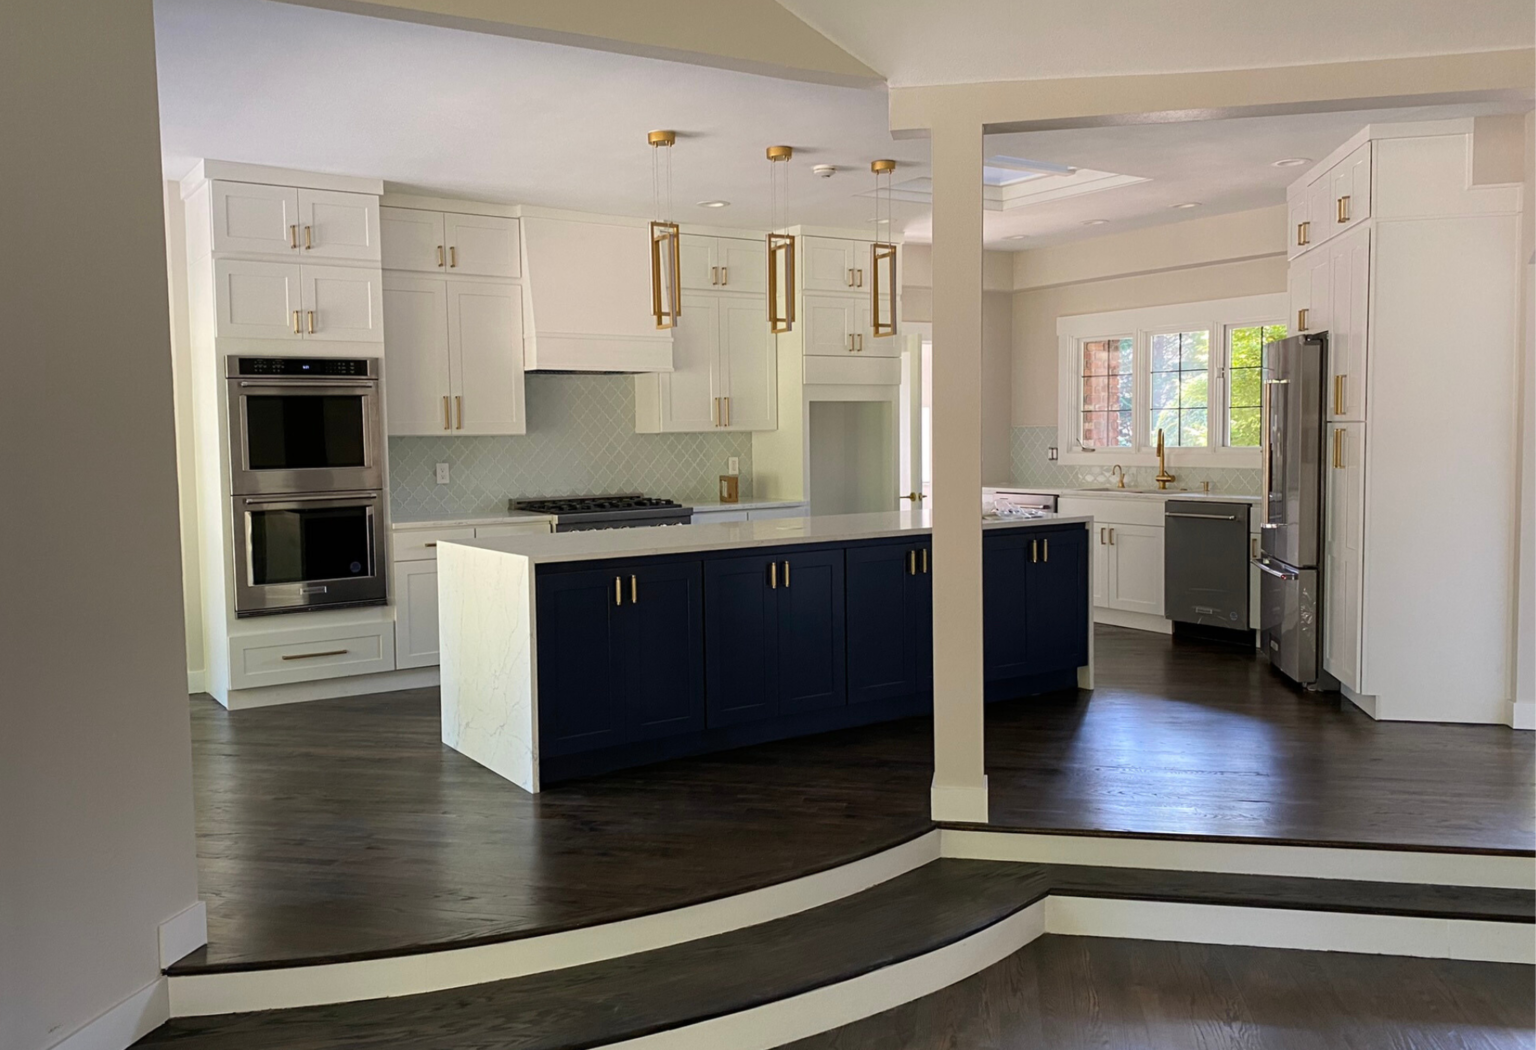 West Seattle Kitchen Remodeling